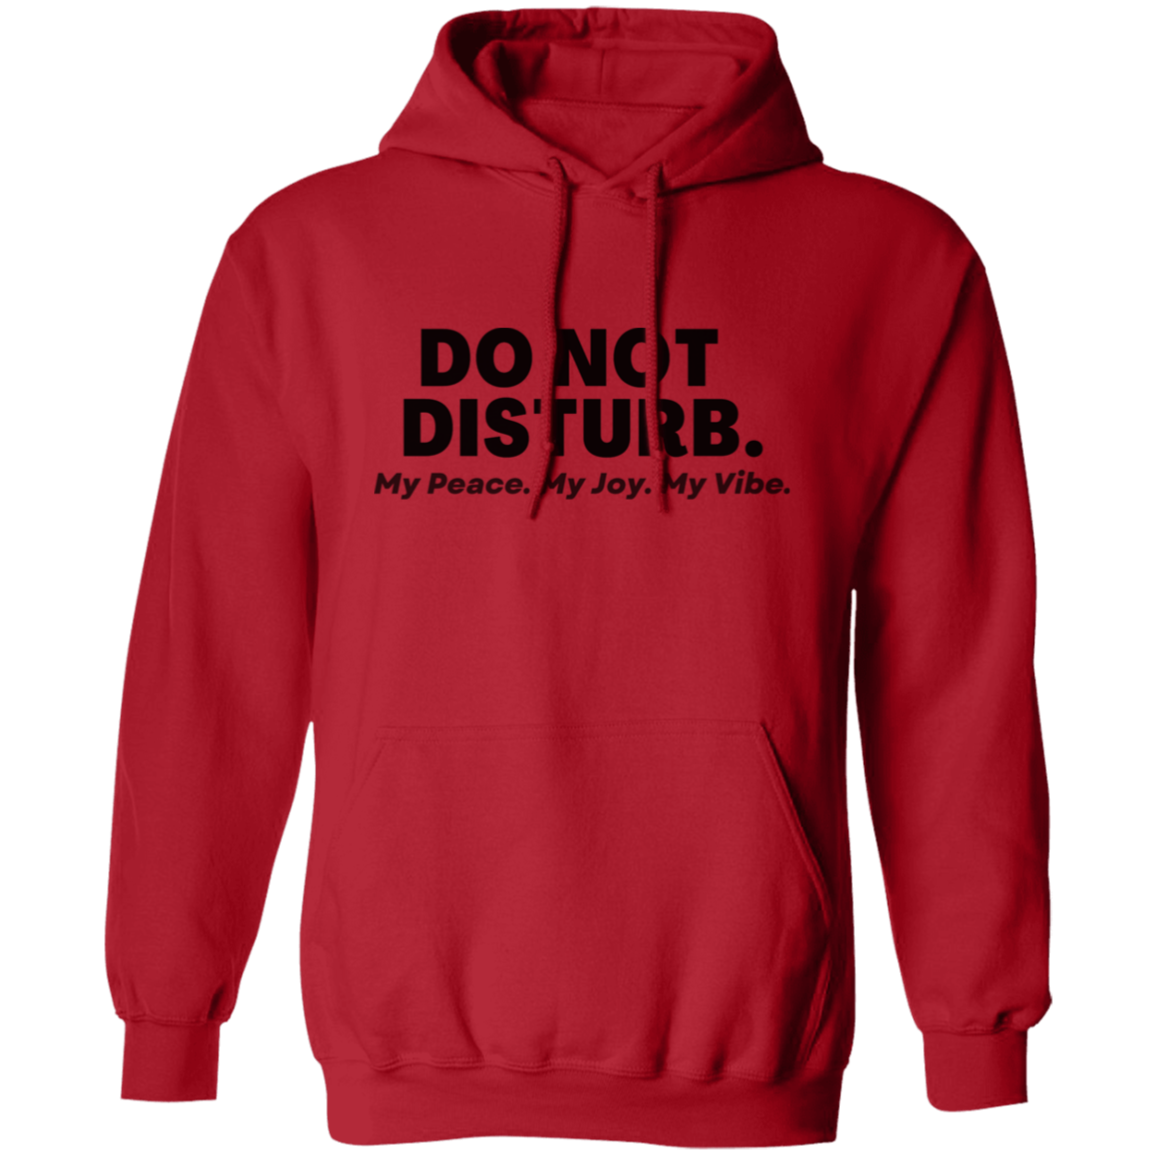 Do Not Disturb - Pull Over Hoodie